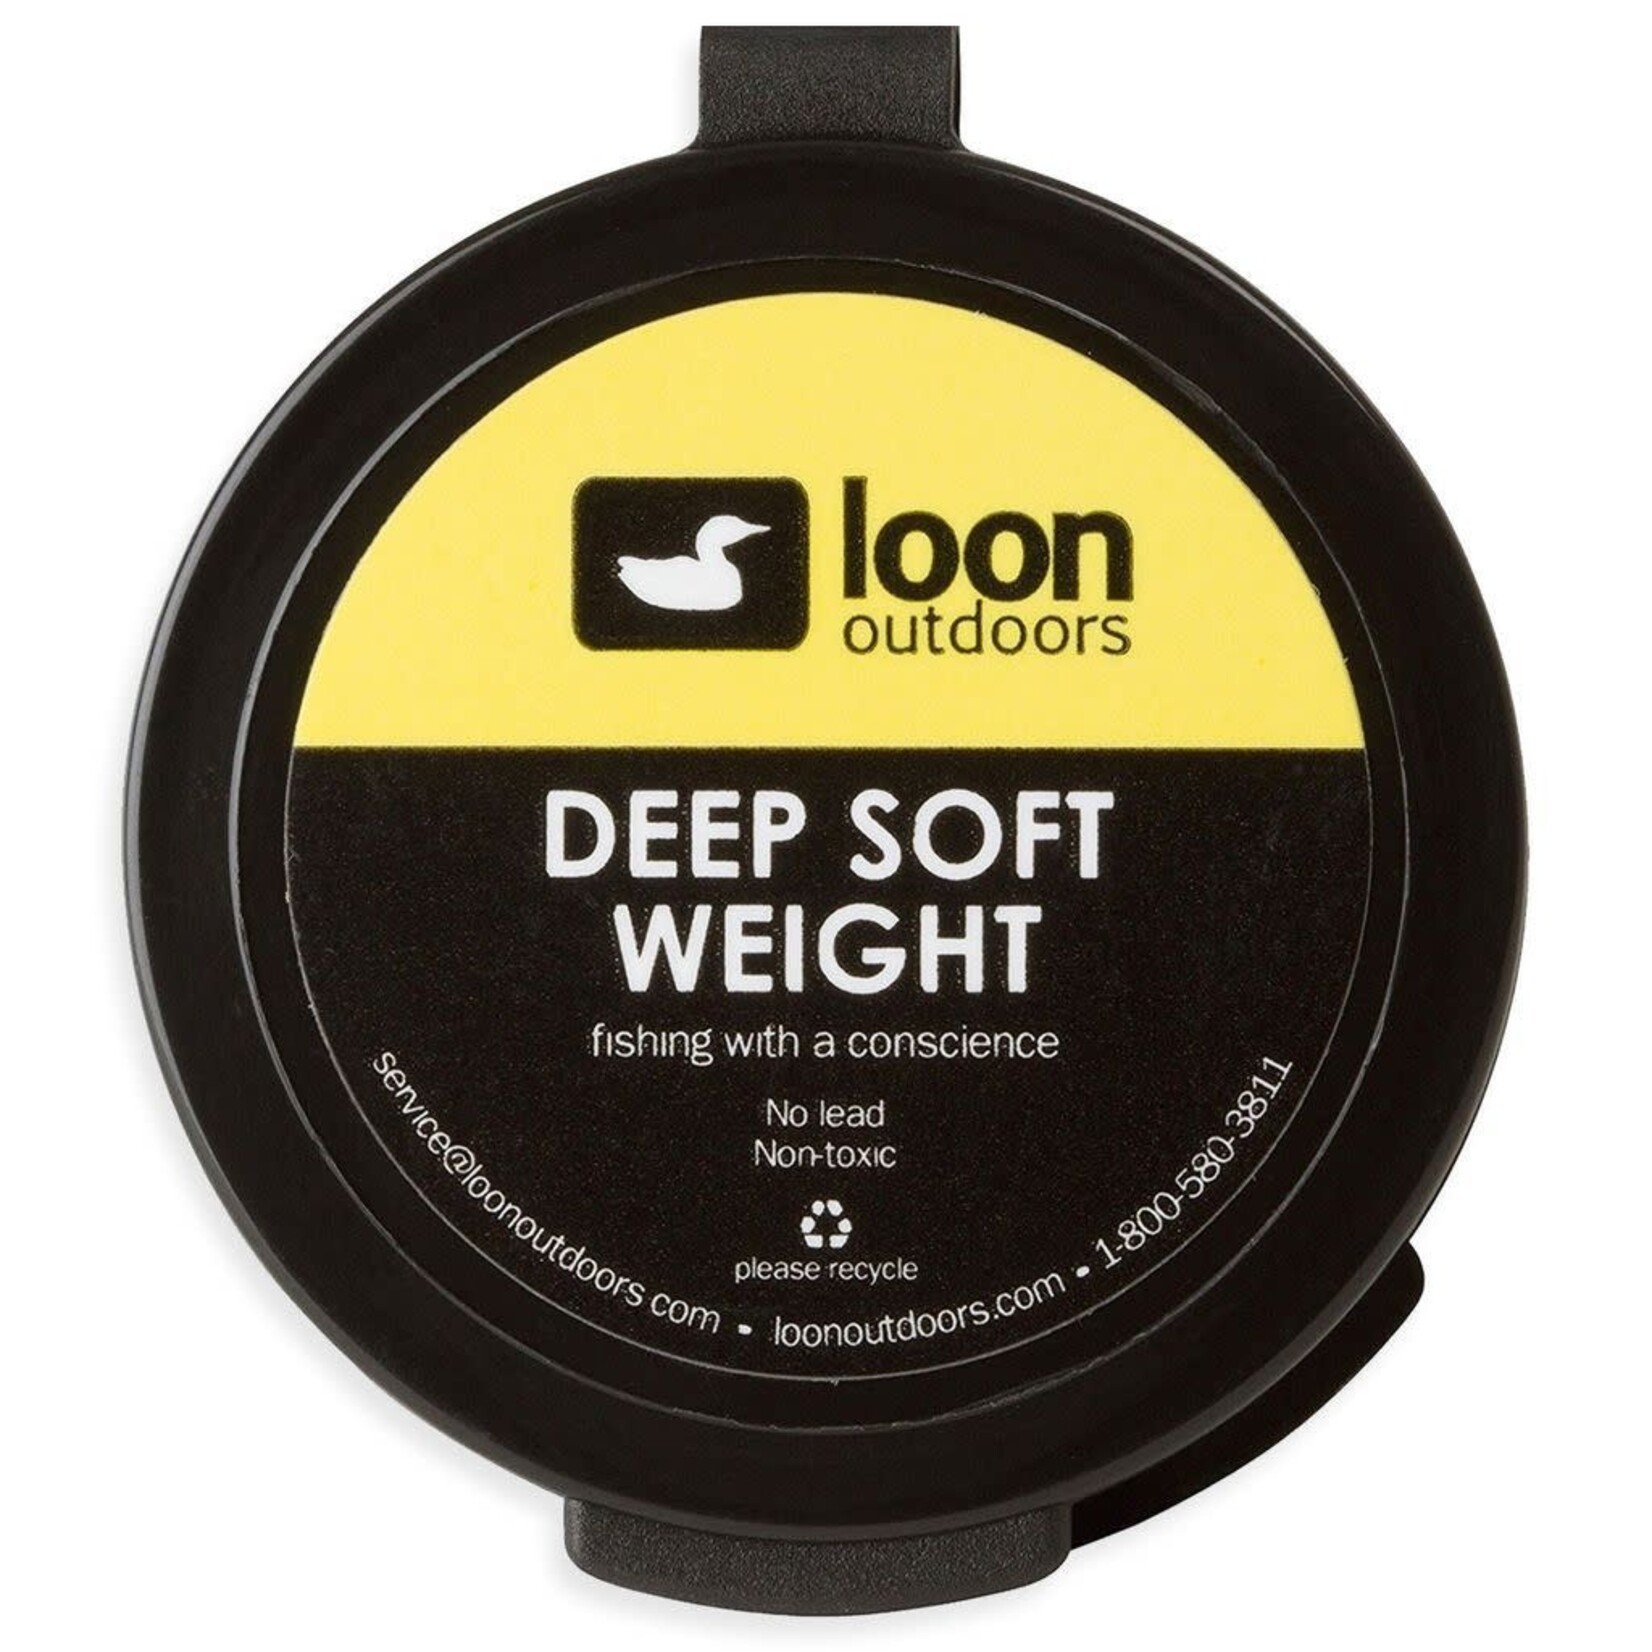 LOON OUTDOORS LOON OUTDOORS DEEP SOFT WEIGHT